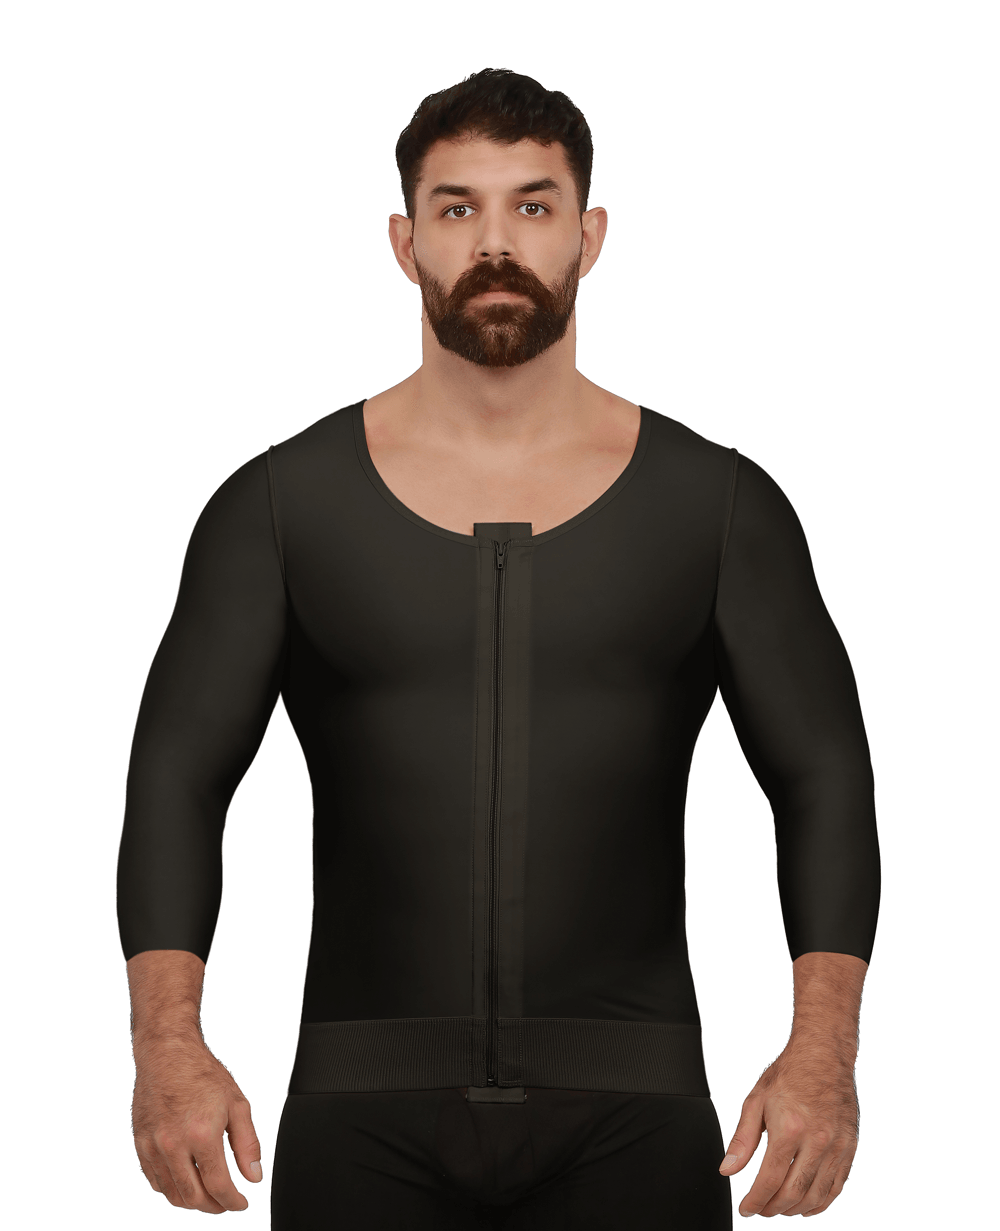 Male Mid Sleeve (3/4) Abdominal Cosmetic Surgery Compression Vest with Zipper (MG06-MS) - Isavela Compression Garments